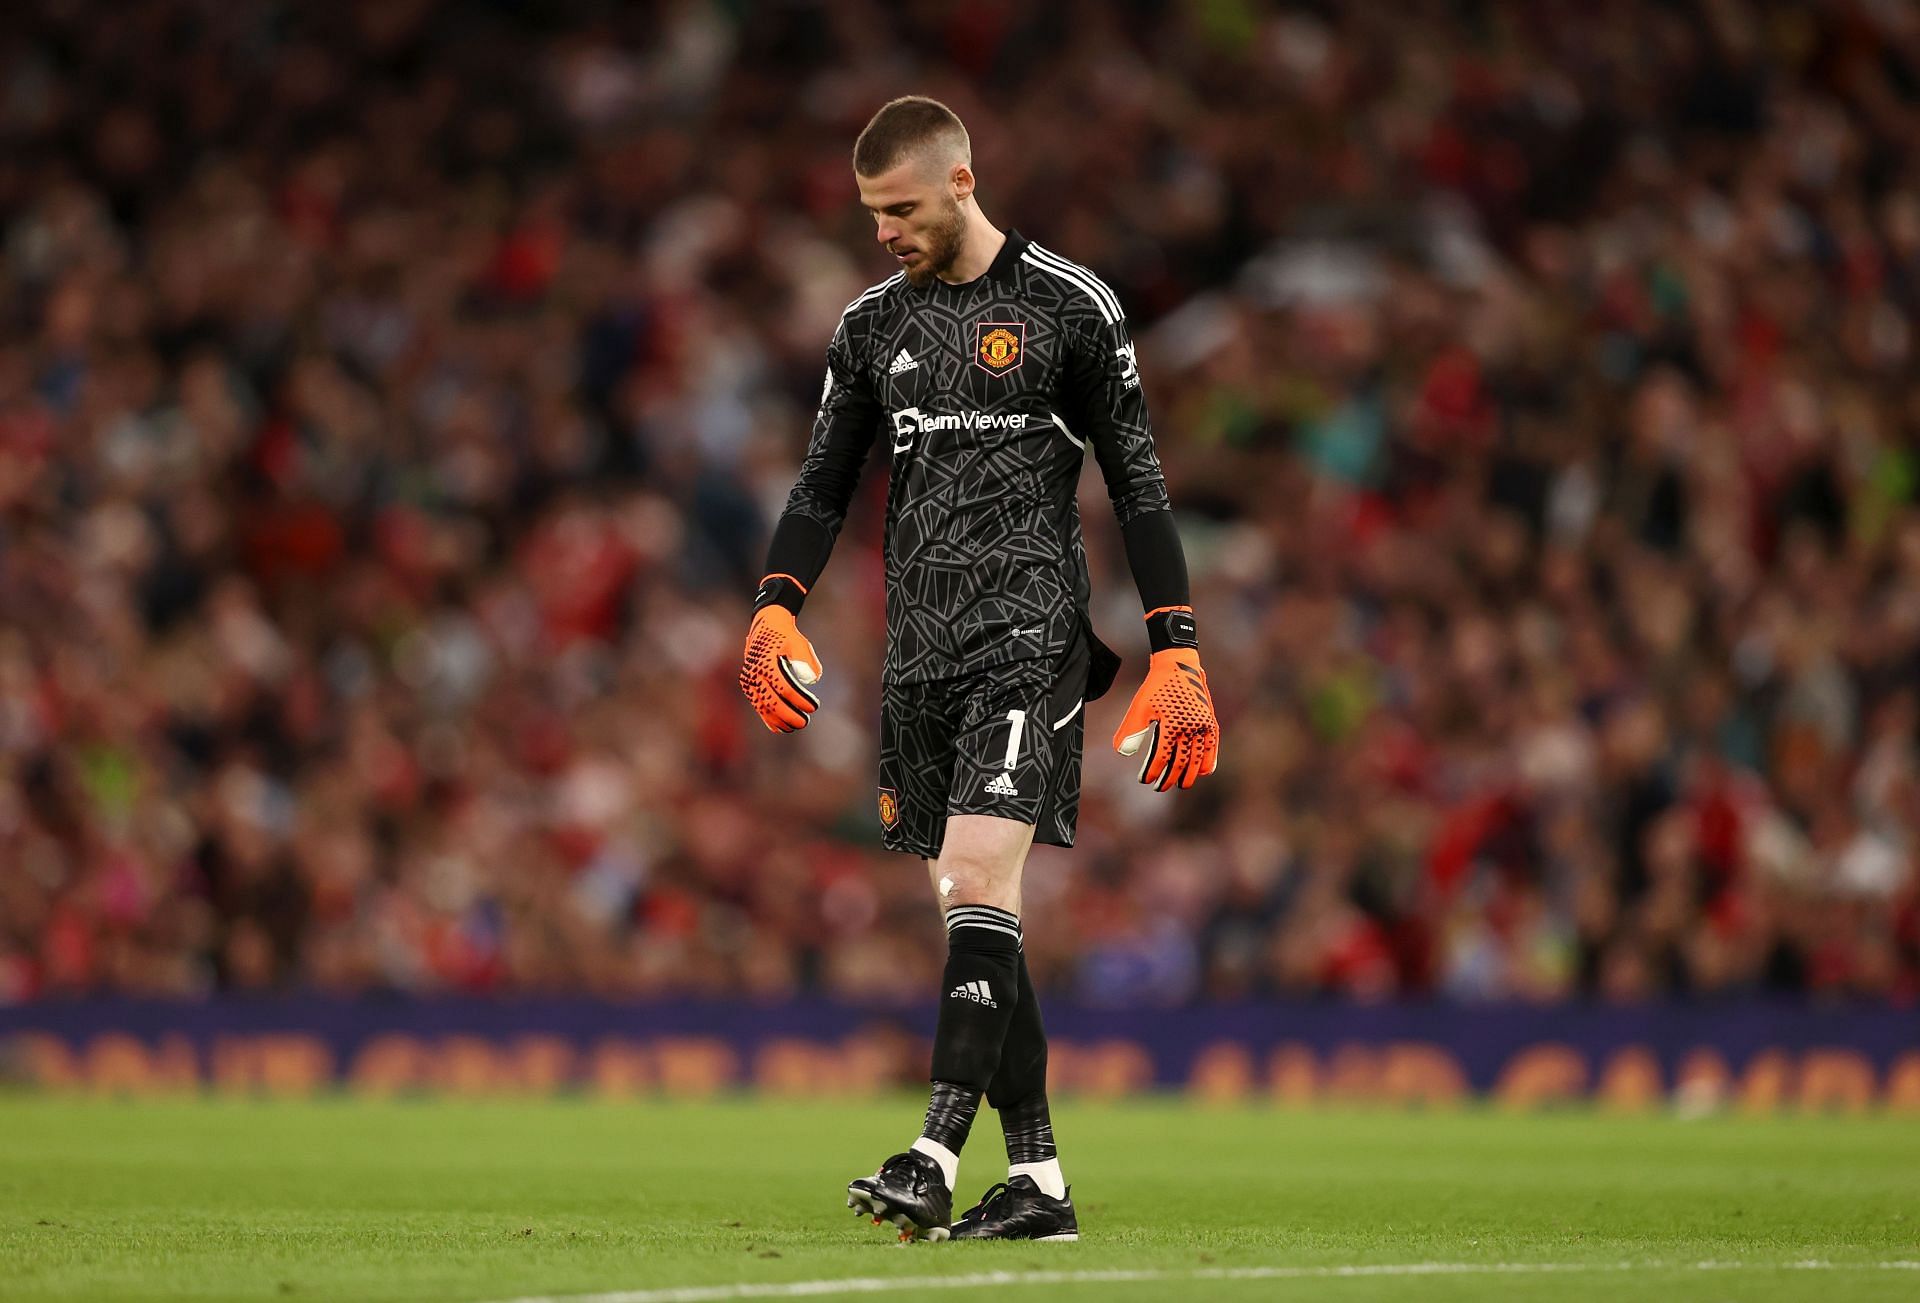 de Gea is still a free agent after leaving Old Trafford.